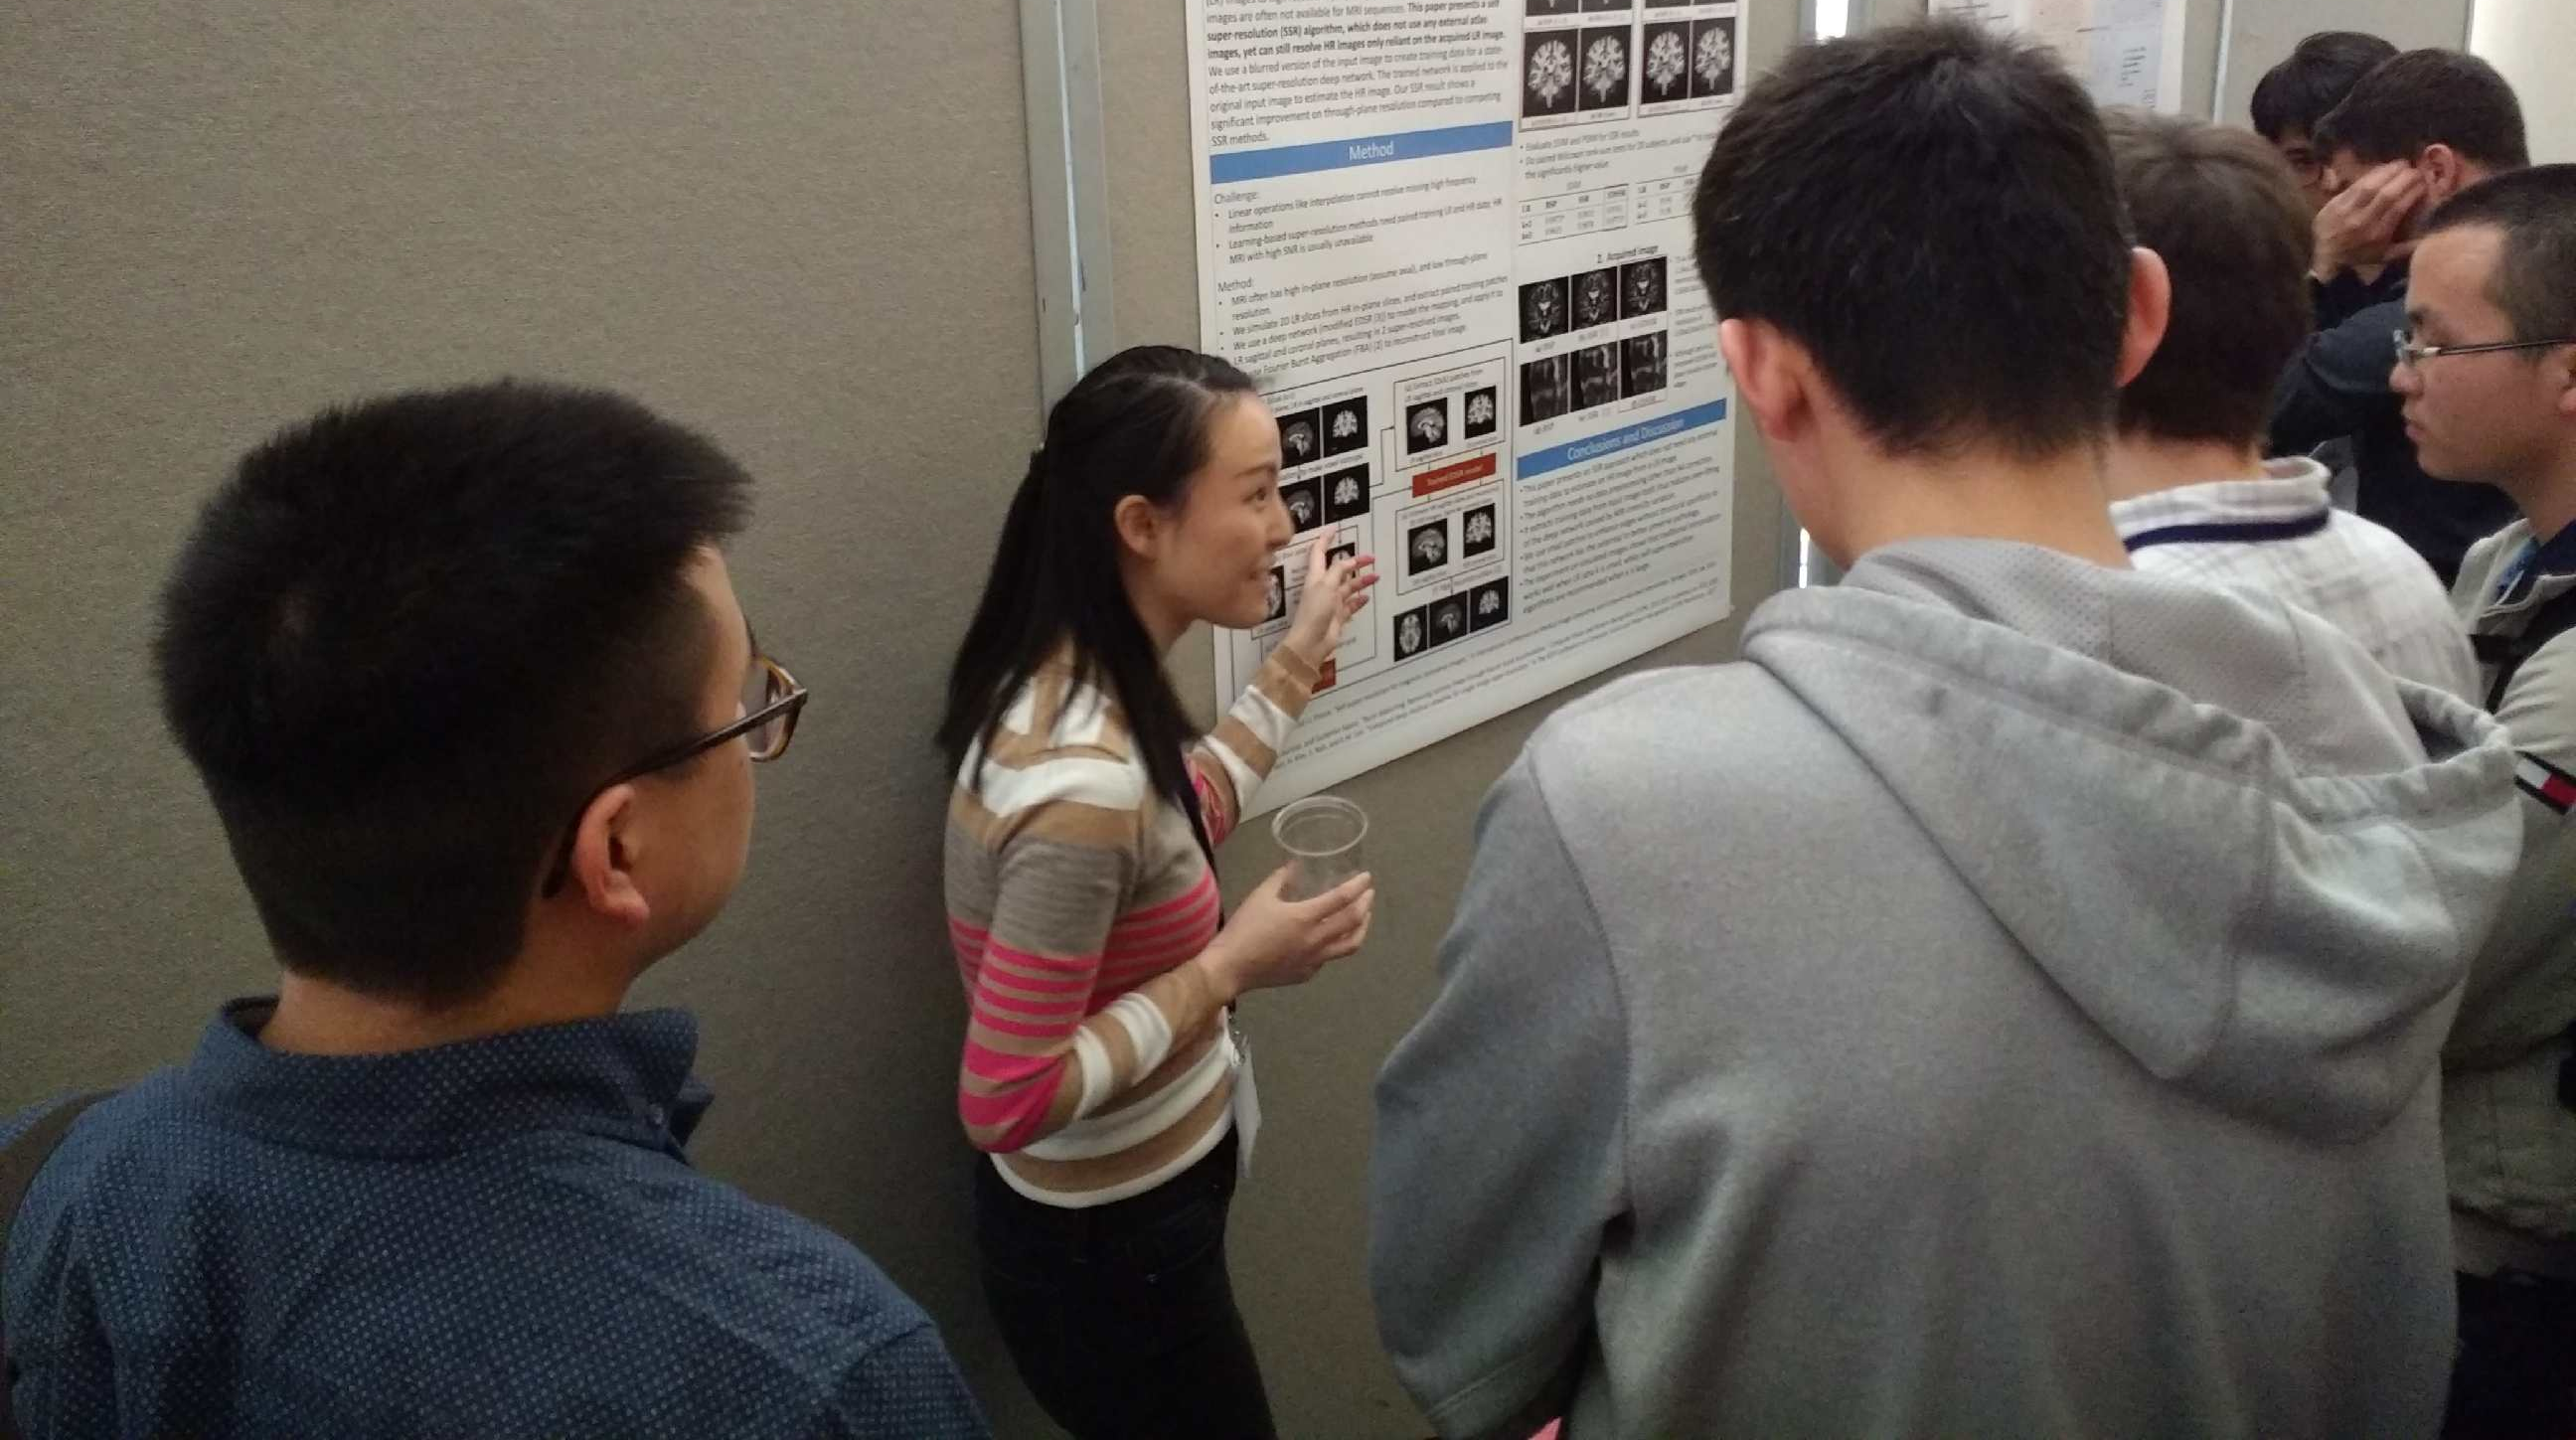 Can Zhao presenting her poster titled "Self Super-Resolution for Magnetic Resonance Images Using Deep Networks" at ISBI 2018 in Washington DC.